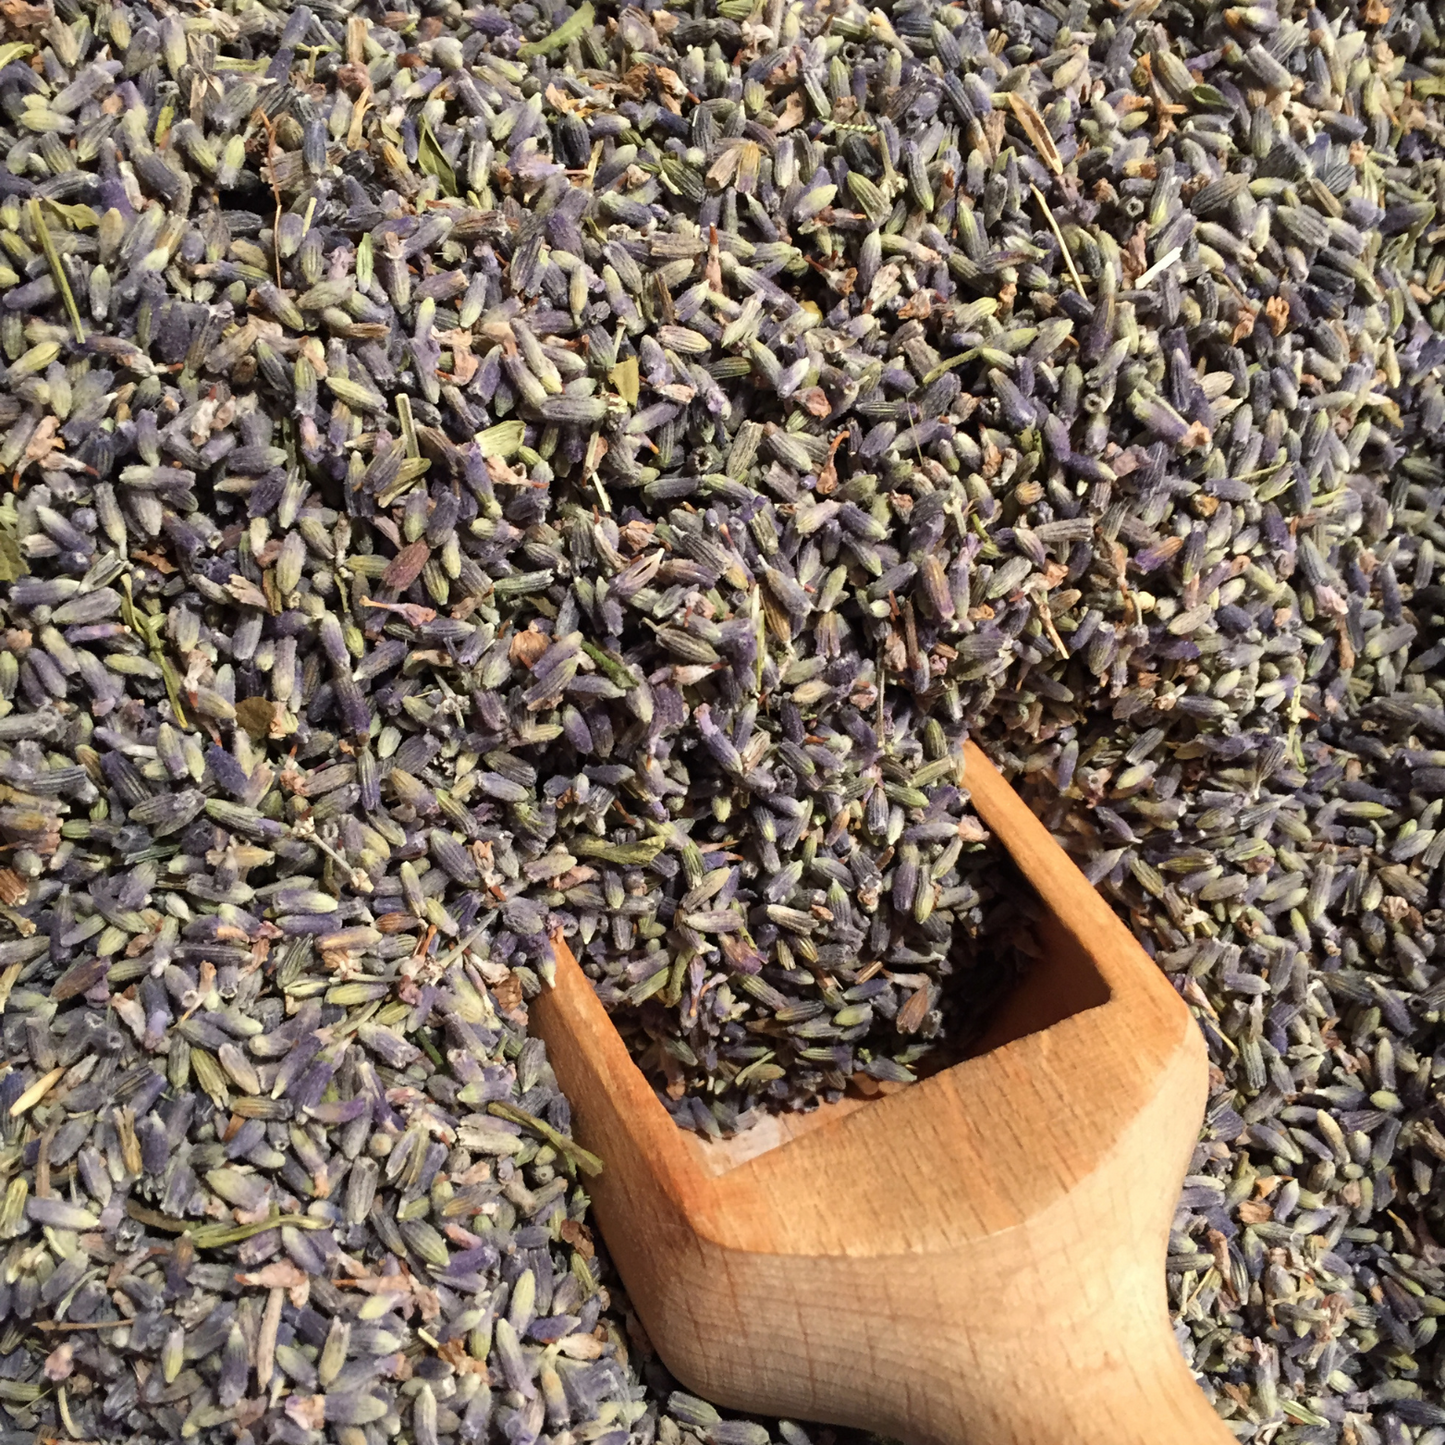 Lavender Flowers For Simmer Pots, Cooking, Crafting, Tea, Relaxation and Sleep Aid